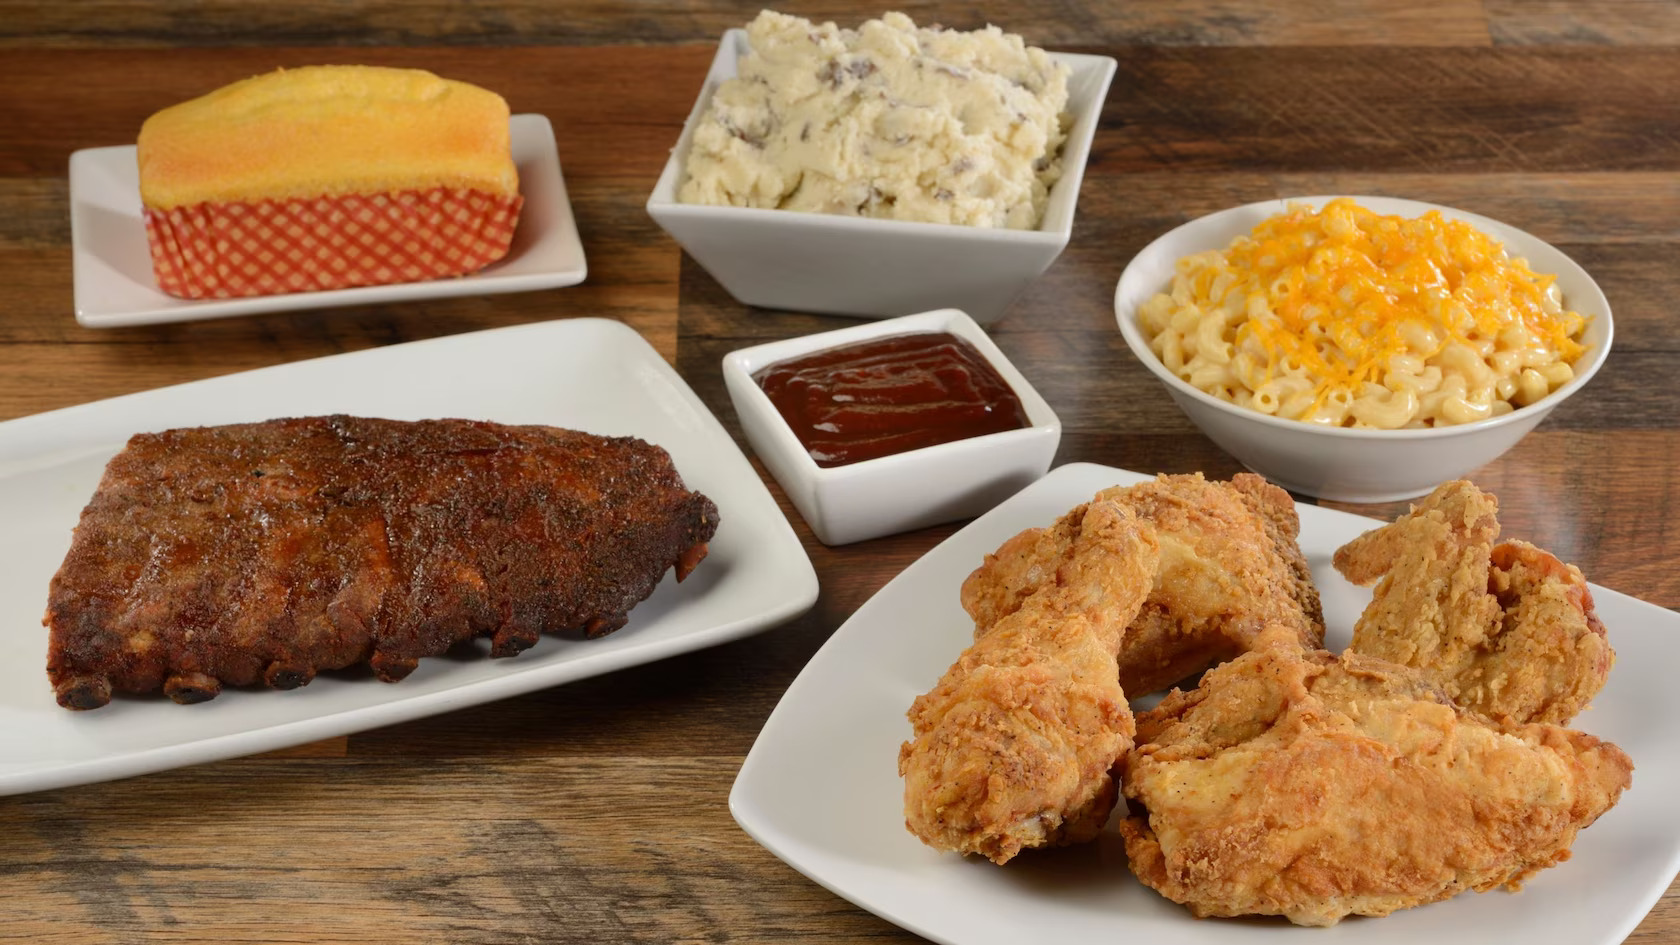 Fried Chicken, Macaroni and Cheese, Corn Bread, Mashed Potatoes - Trail's End Restaurant